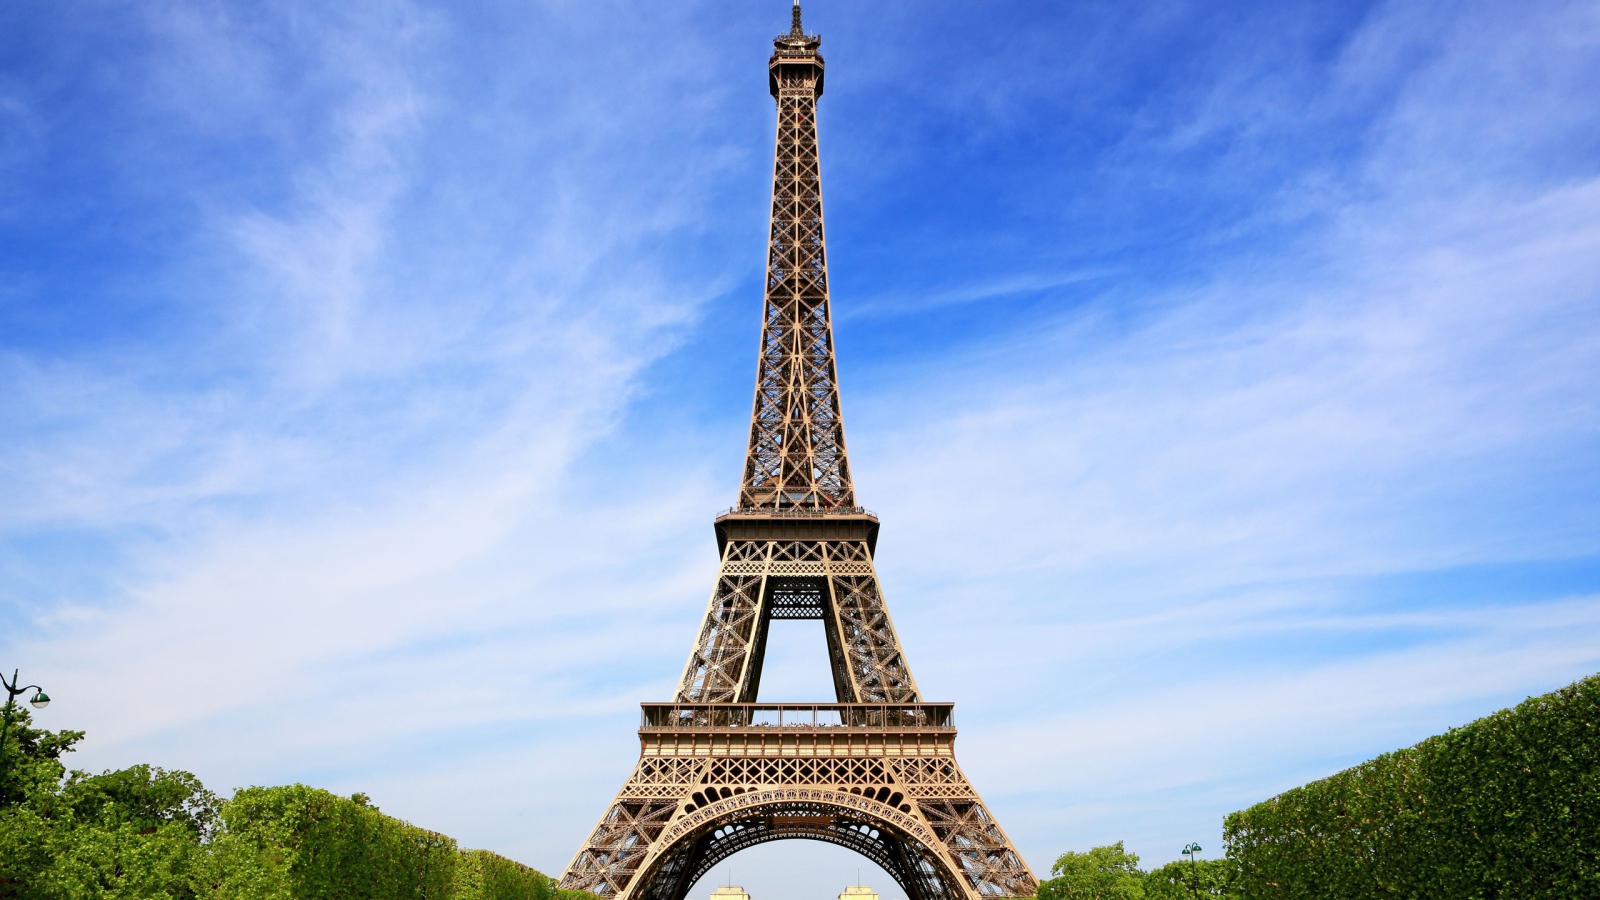 Eiffel Tower on a clear day